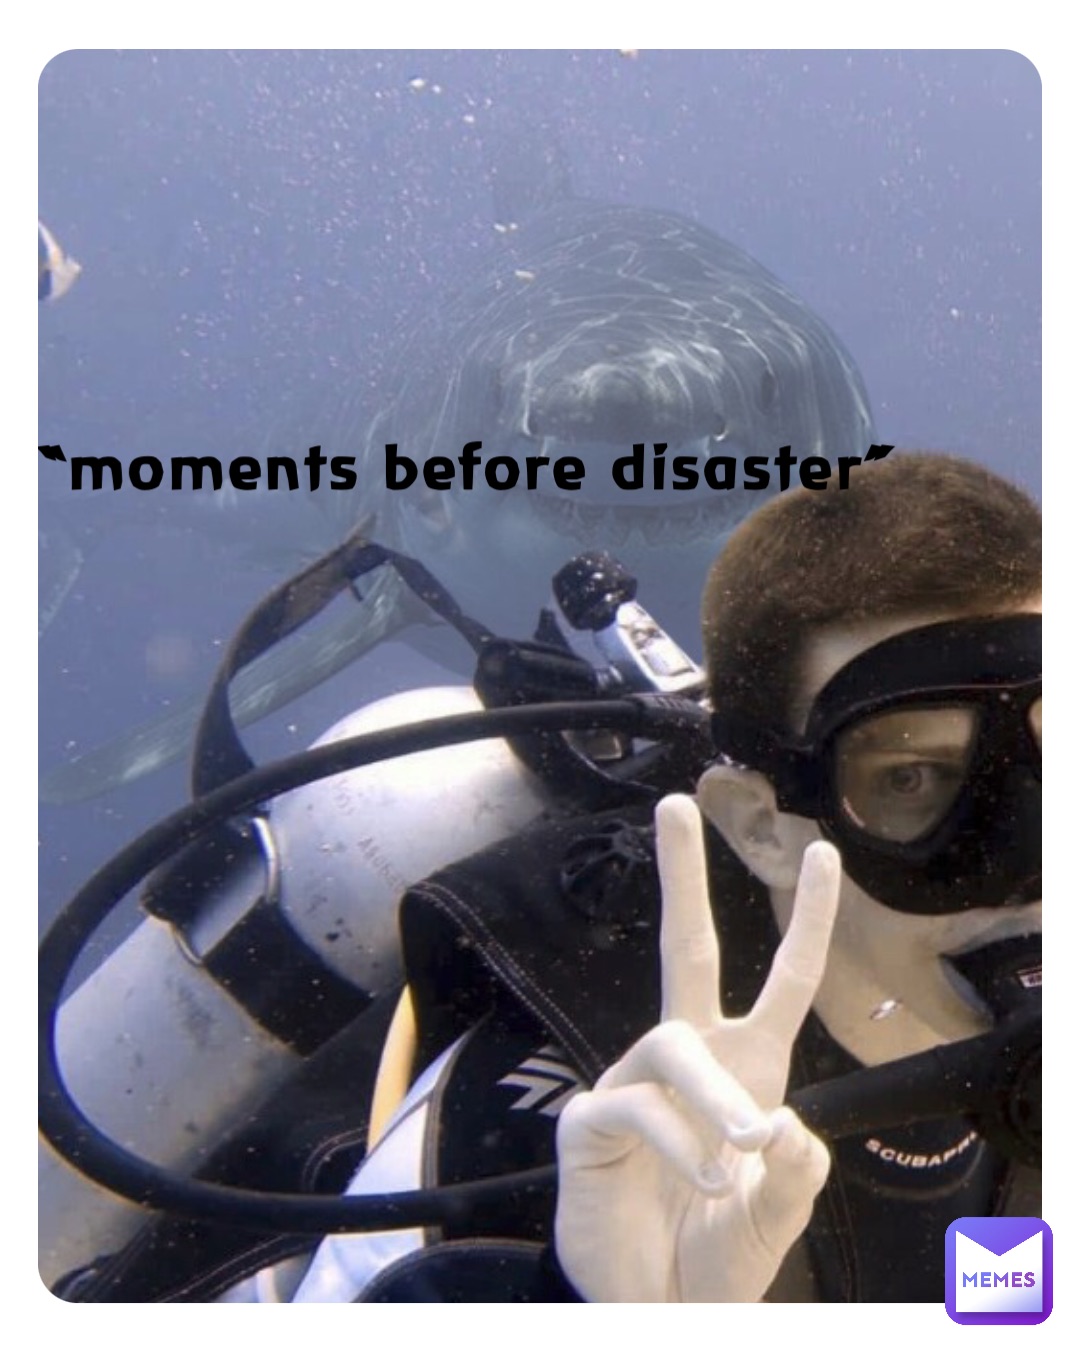 “moments before disaster”